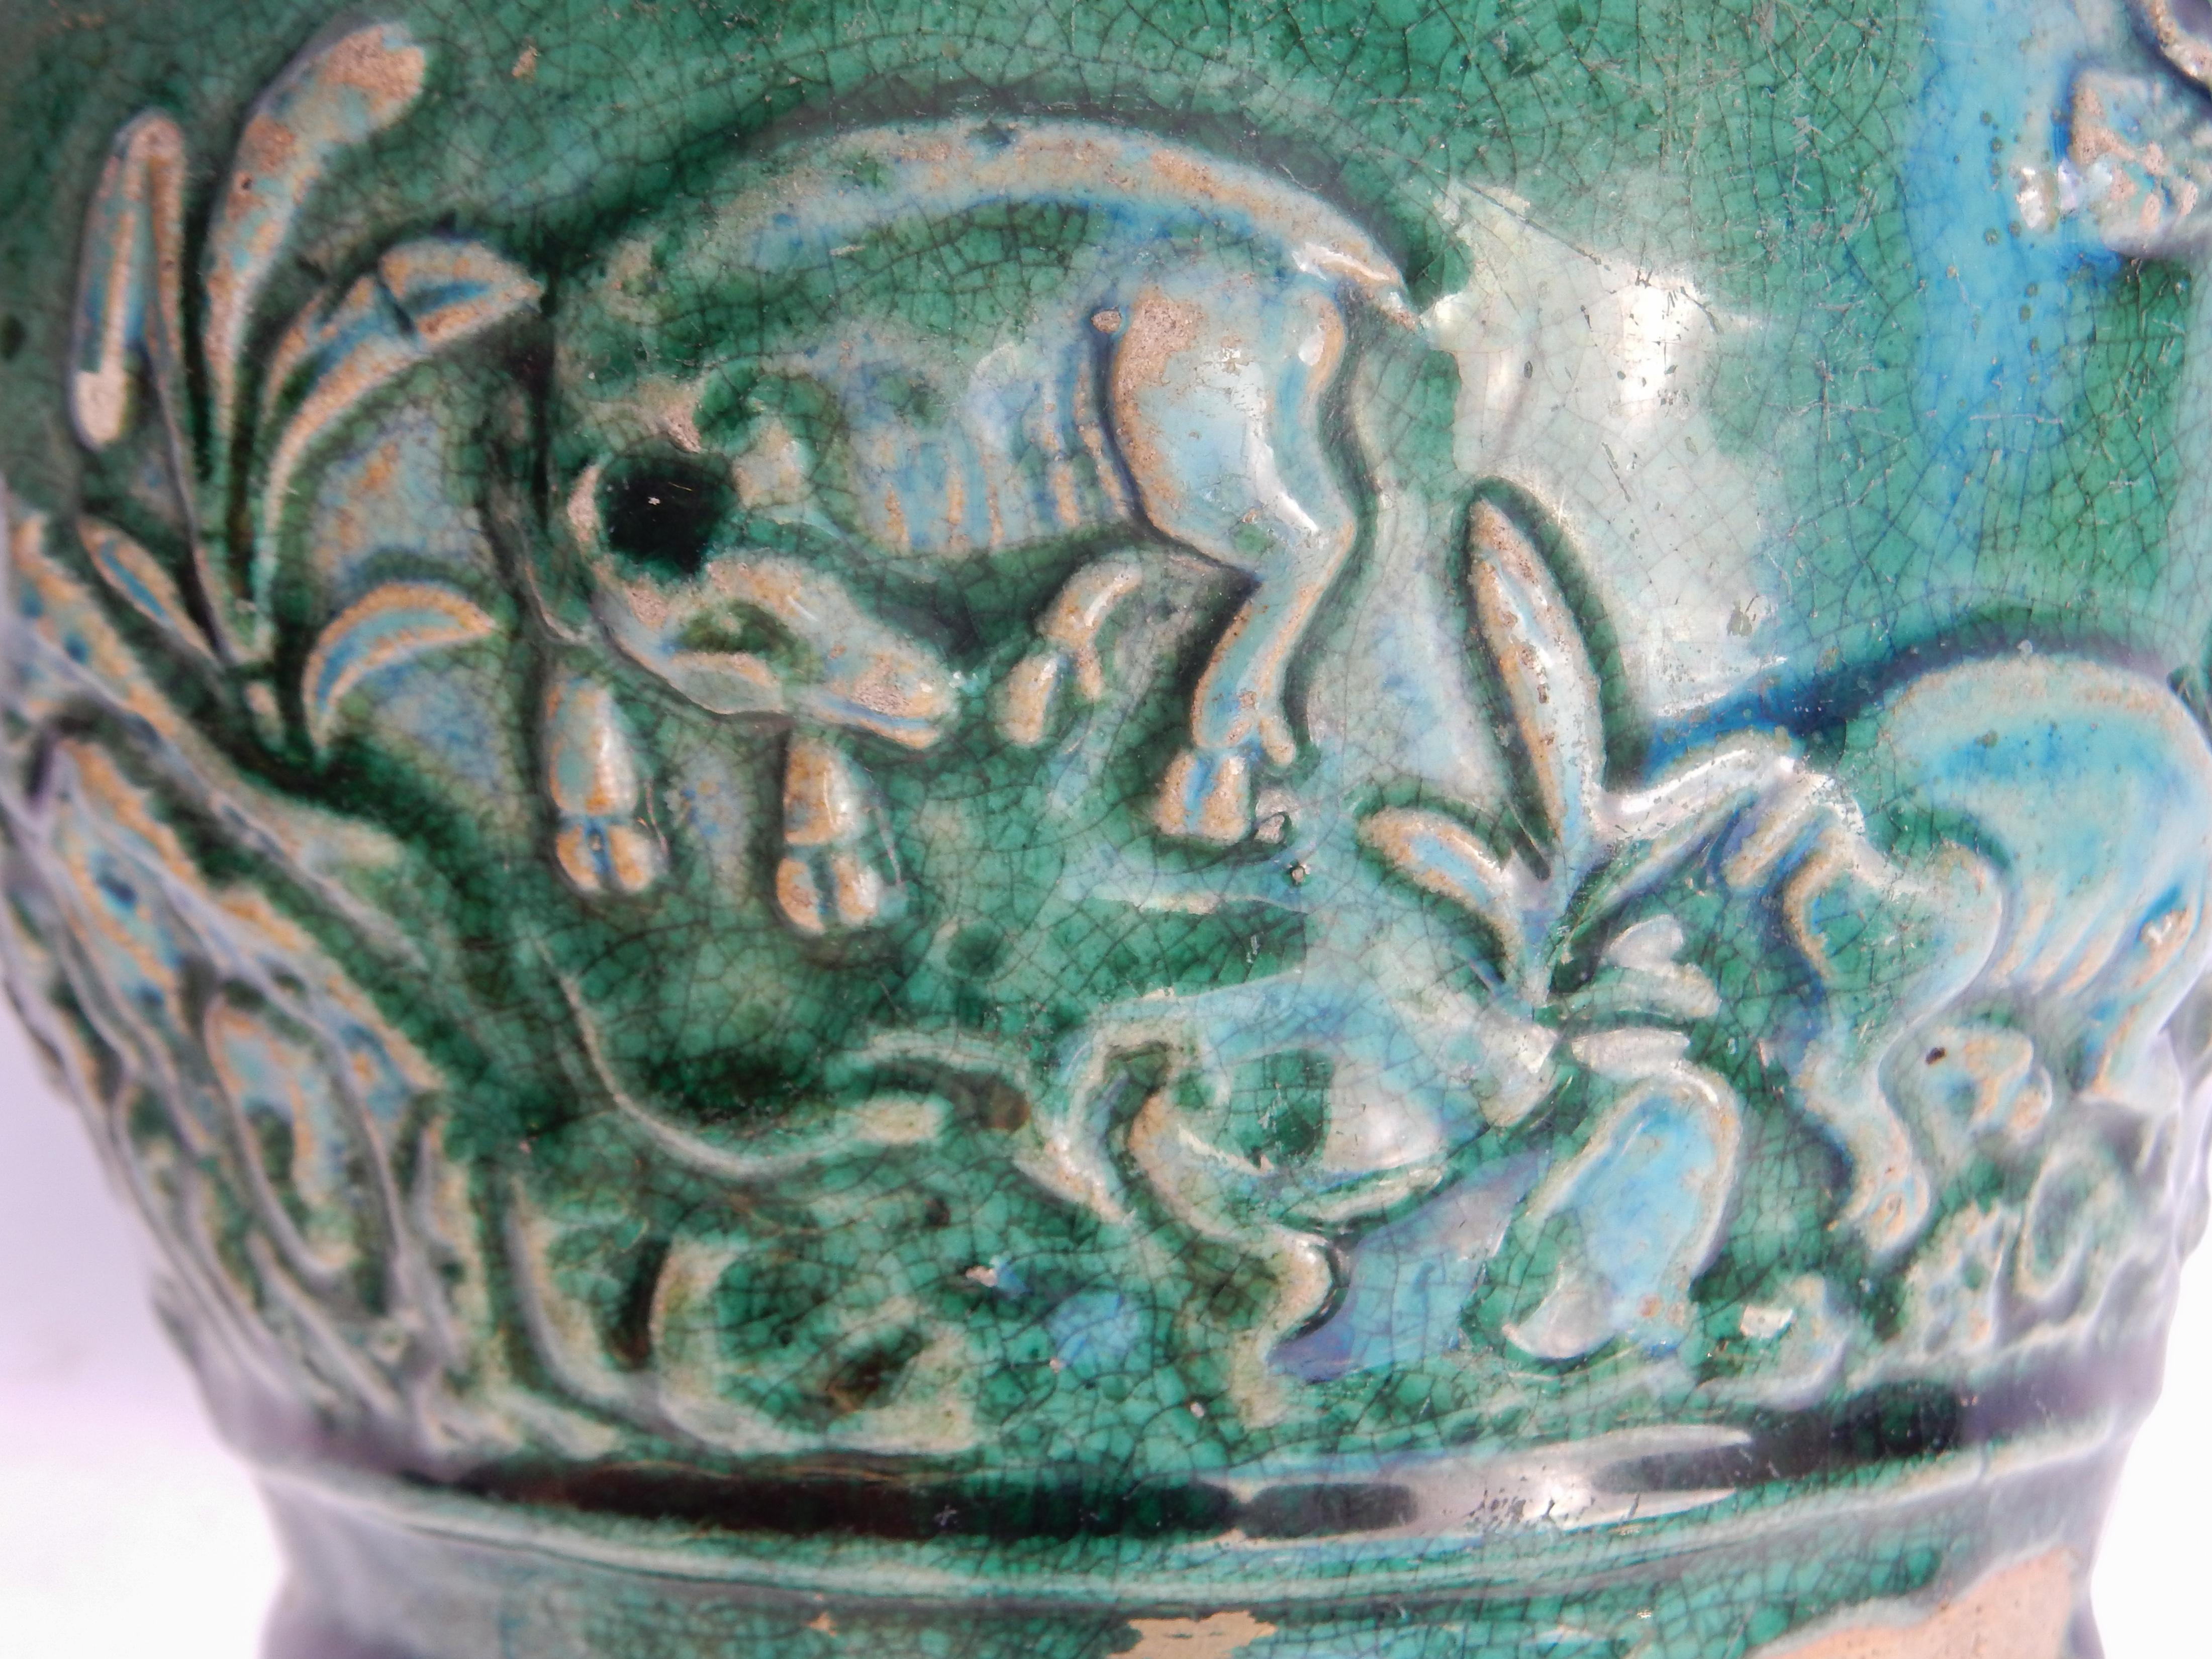 Ceramic Old Green Glazed Pot from Southern Thailand, Found in Java, Late 19th Century